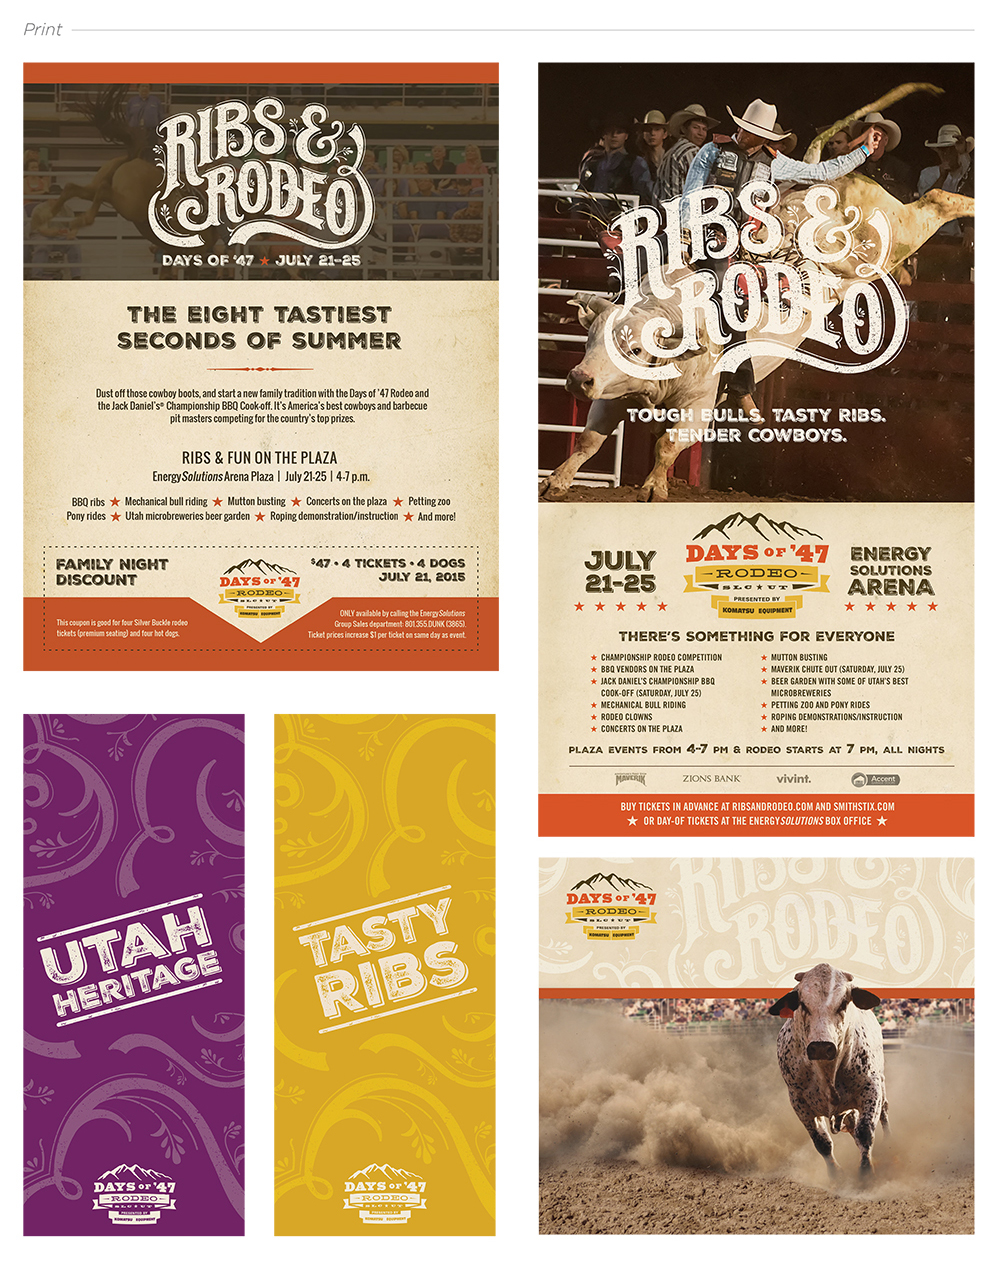 Adobe Portfolio days of '47 rodeo hand-lettering campaign